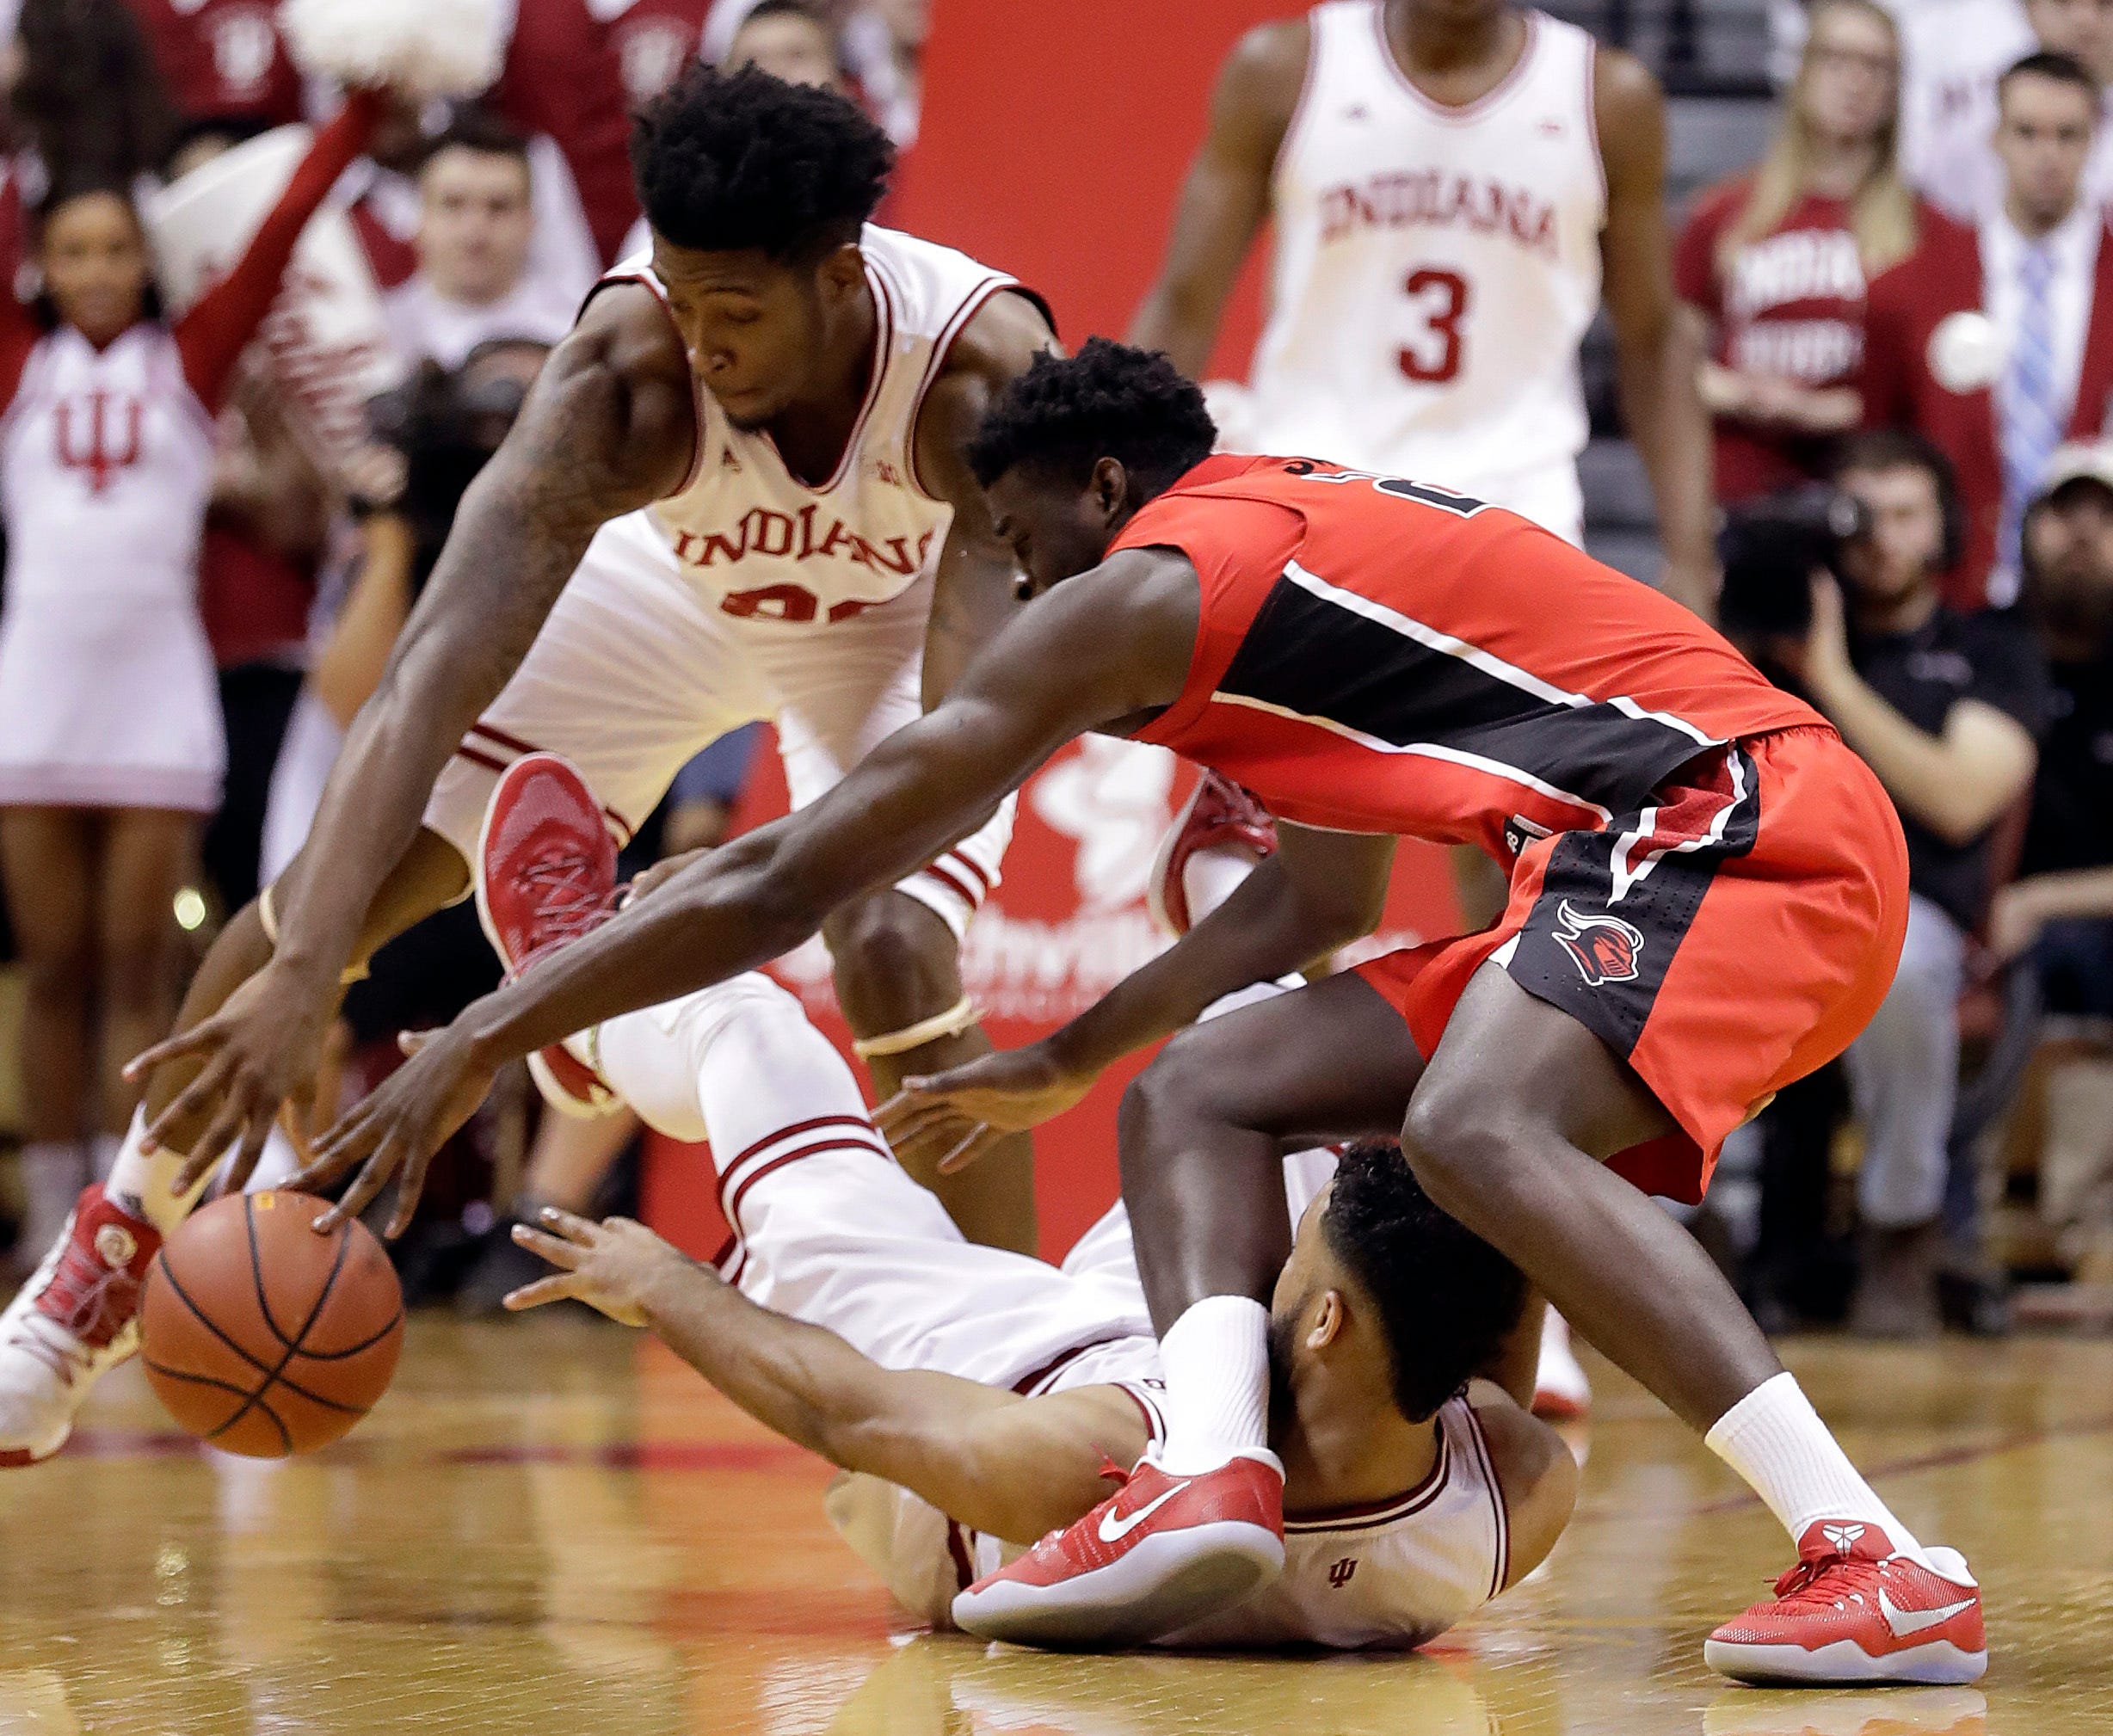 Indiana cleans up turnover trouble, takes down Rutgers 76-57